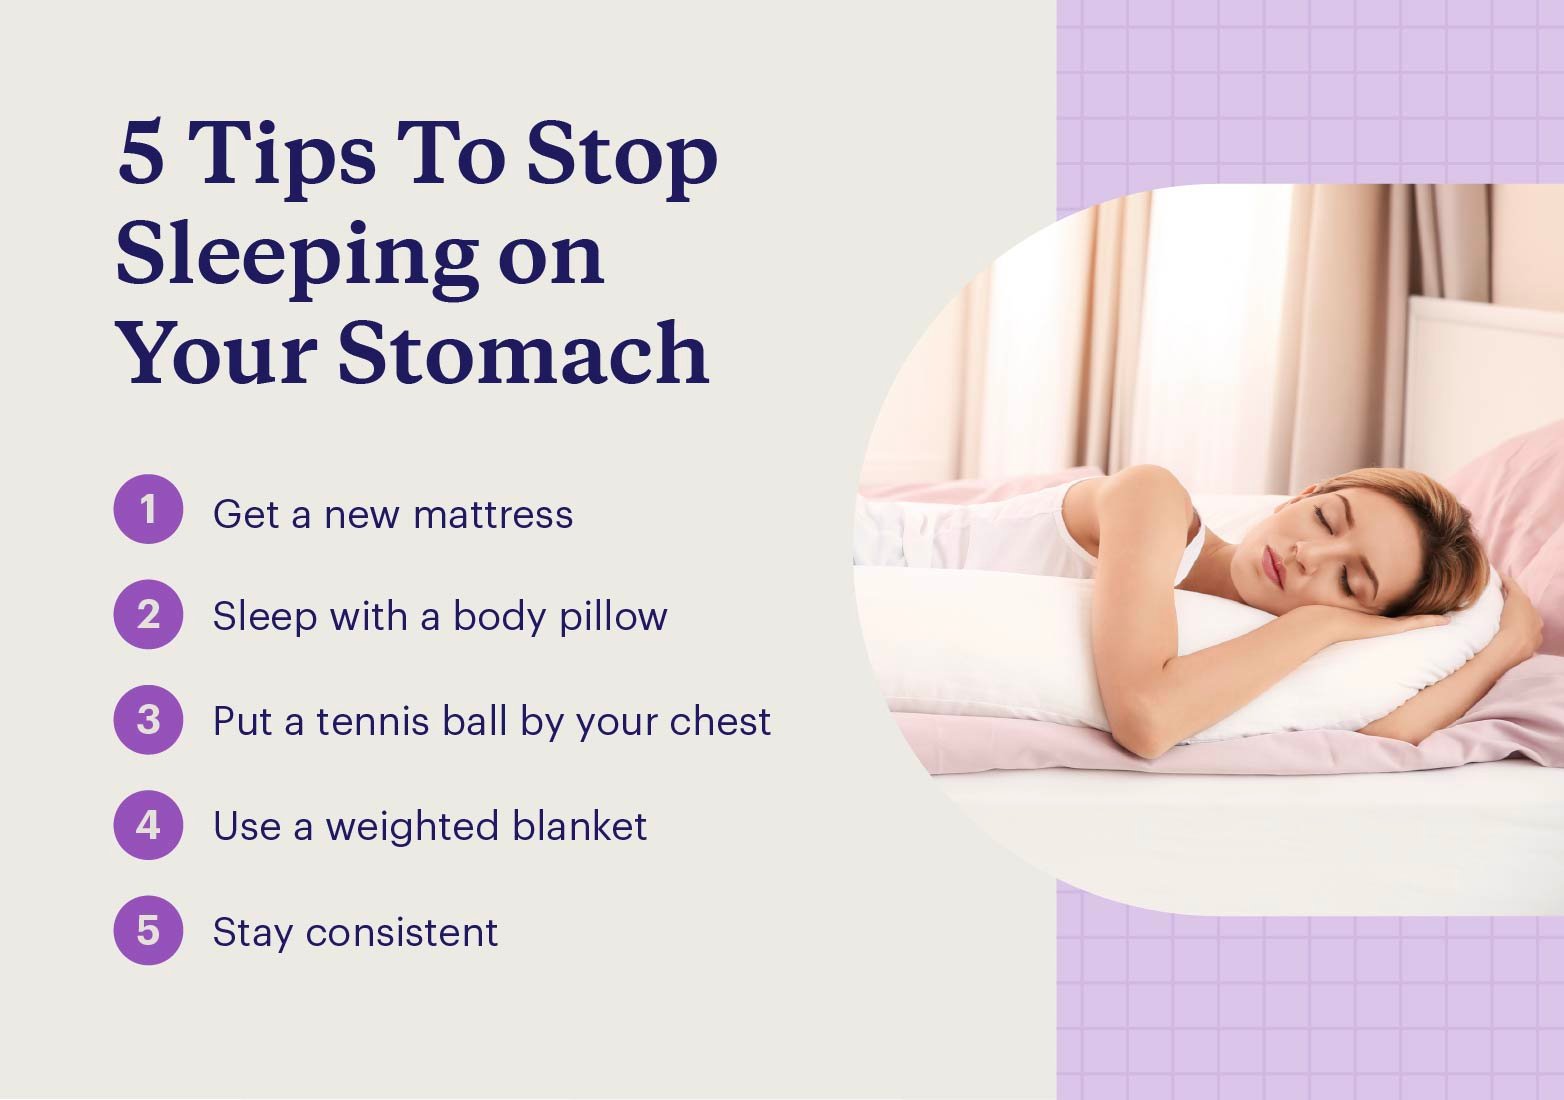 Graphic listing tips to stop sleeping on your stomach.